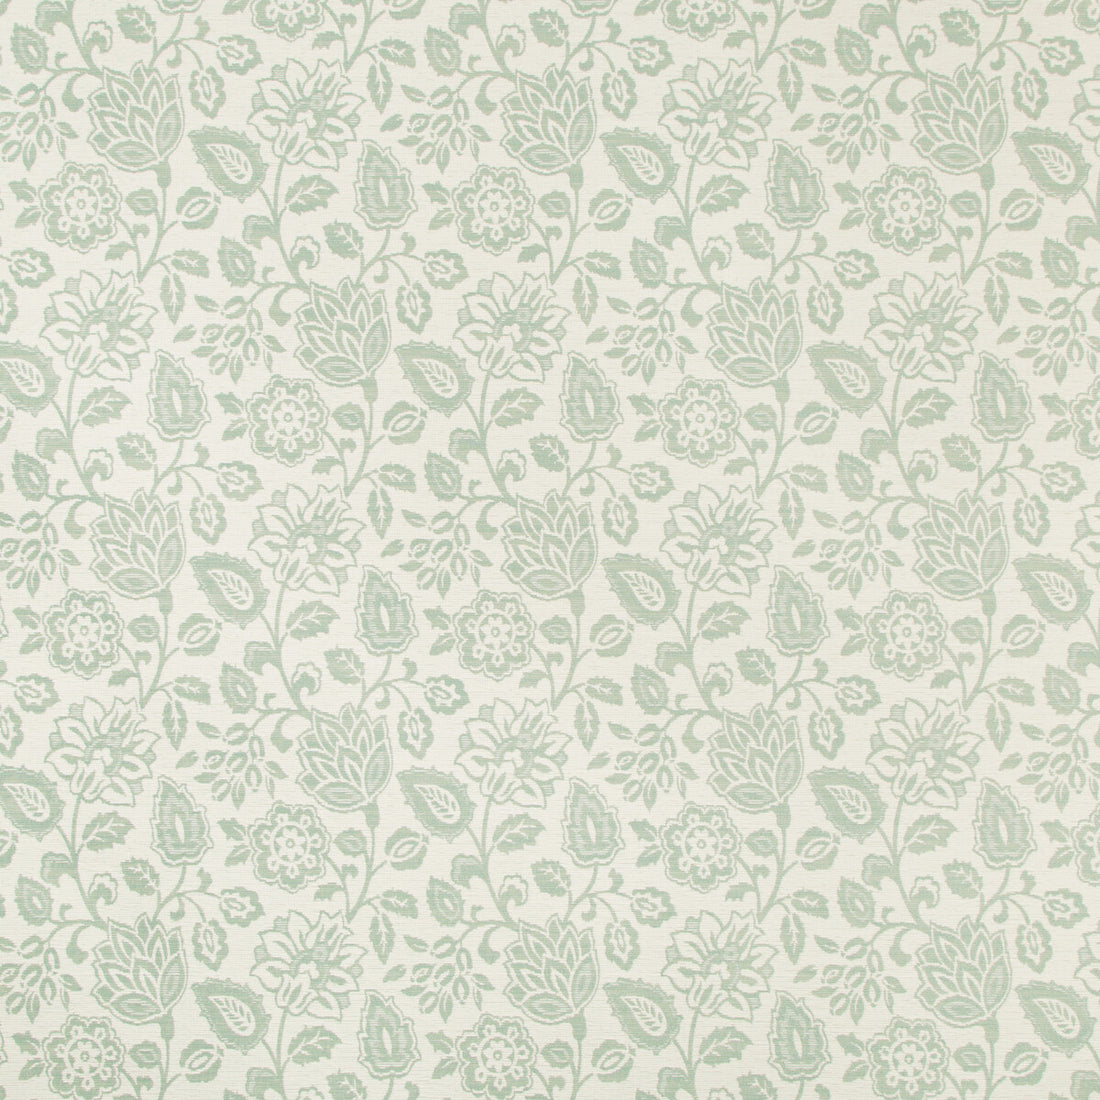 Kf Ctr fabric - pattern 35863.135.0 - by Kravet Contract in the Gis Crypton collection